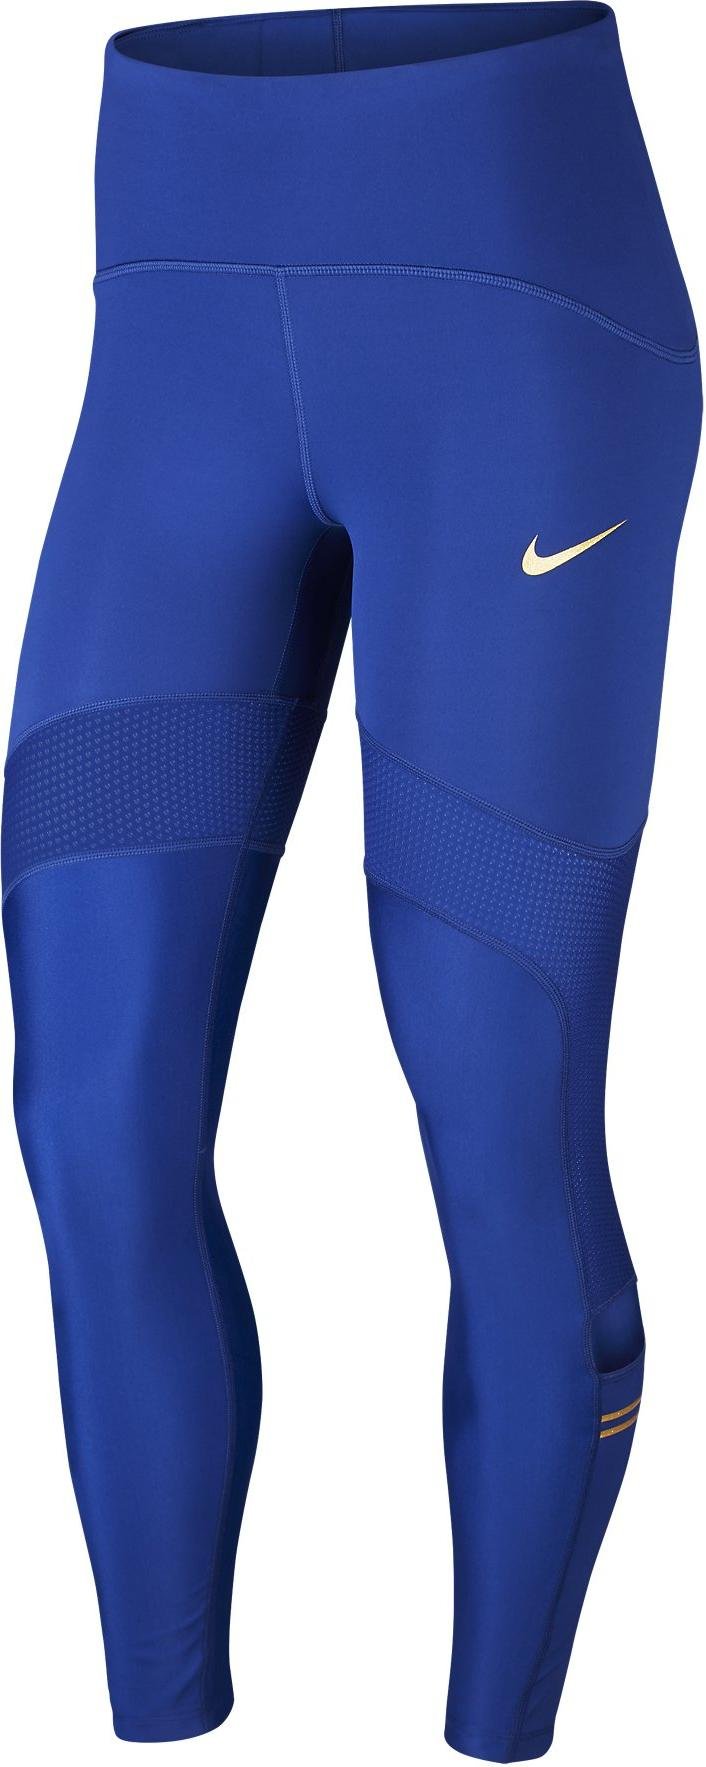 nike speed glam tights